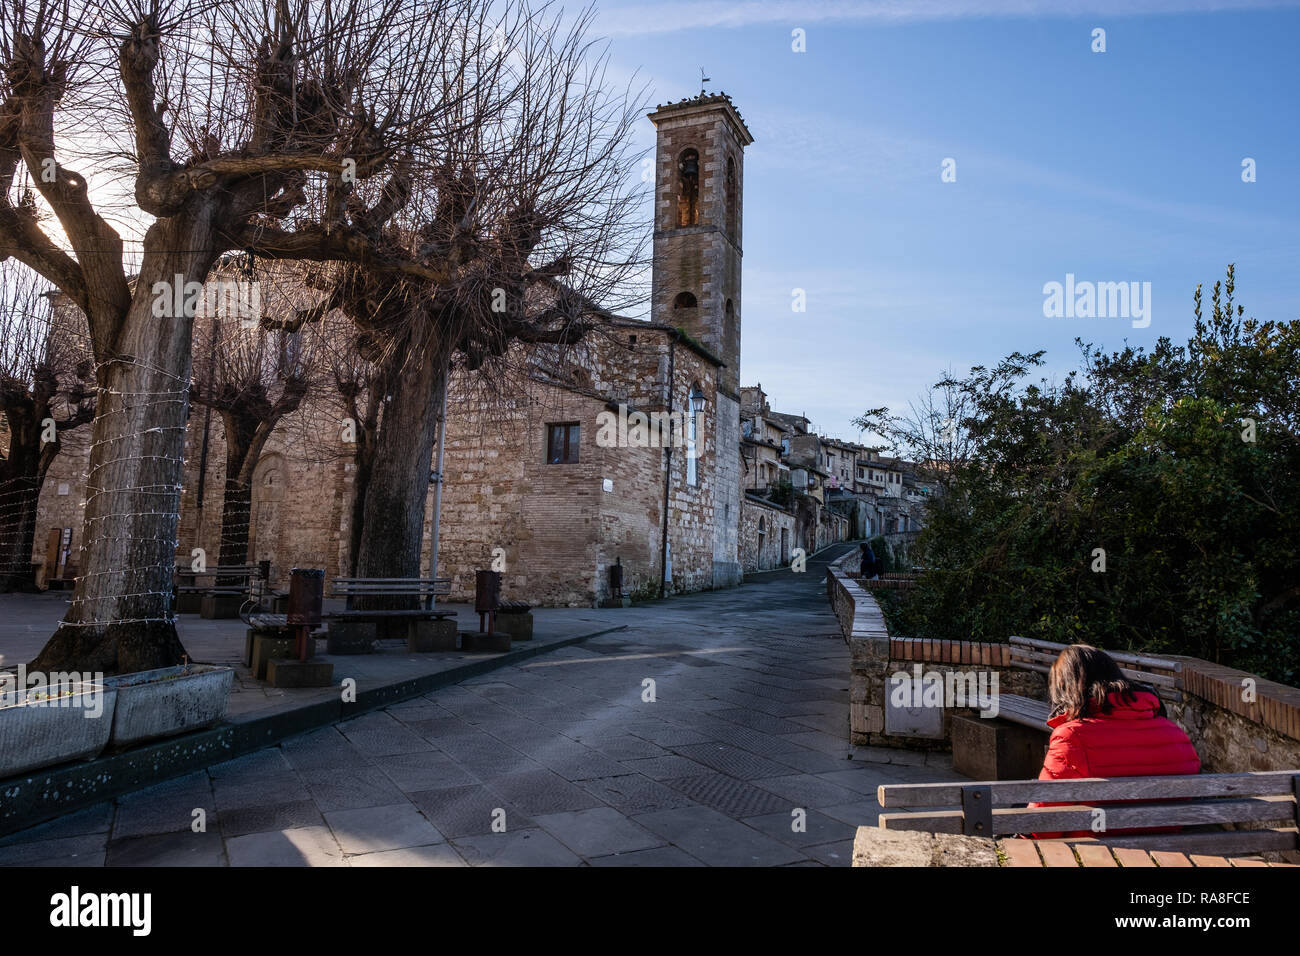 COLLE VAL D’ELSA, ITALY - DECEMBER 26, 2018: Unknown woman near the church of Santa Caterina in the medieval village of Colle di Val d'Elsa, Siena, Tu Stock Photo